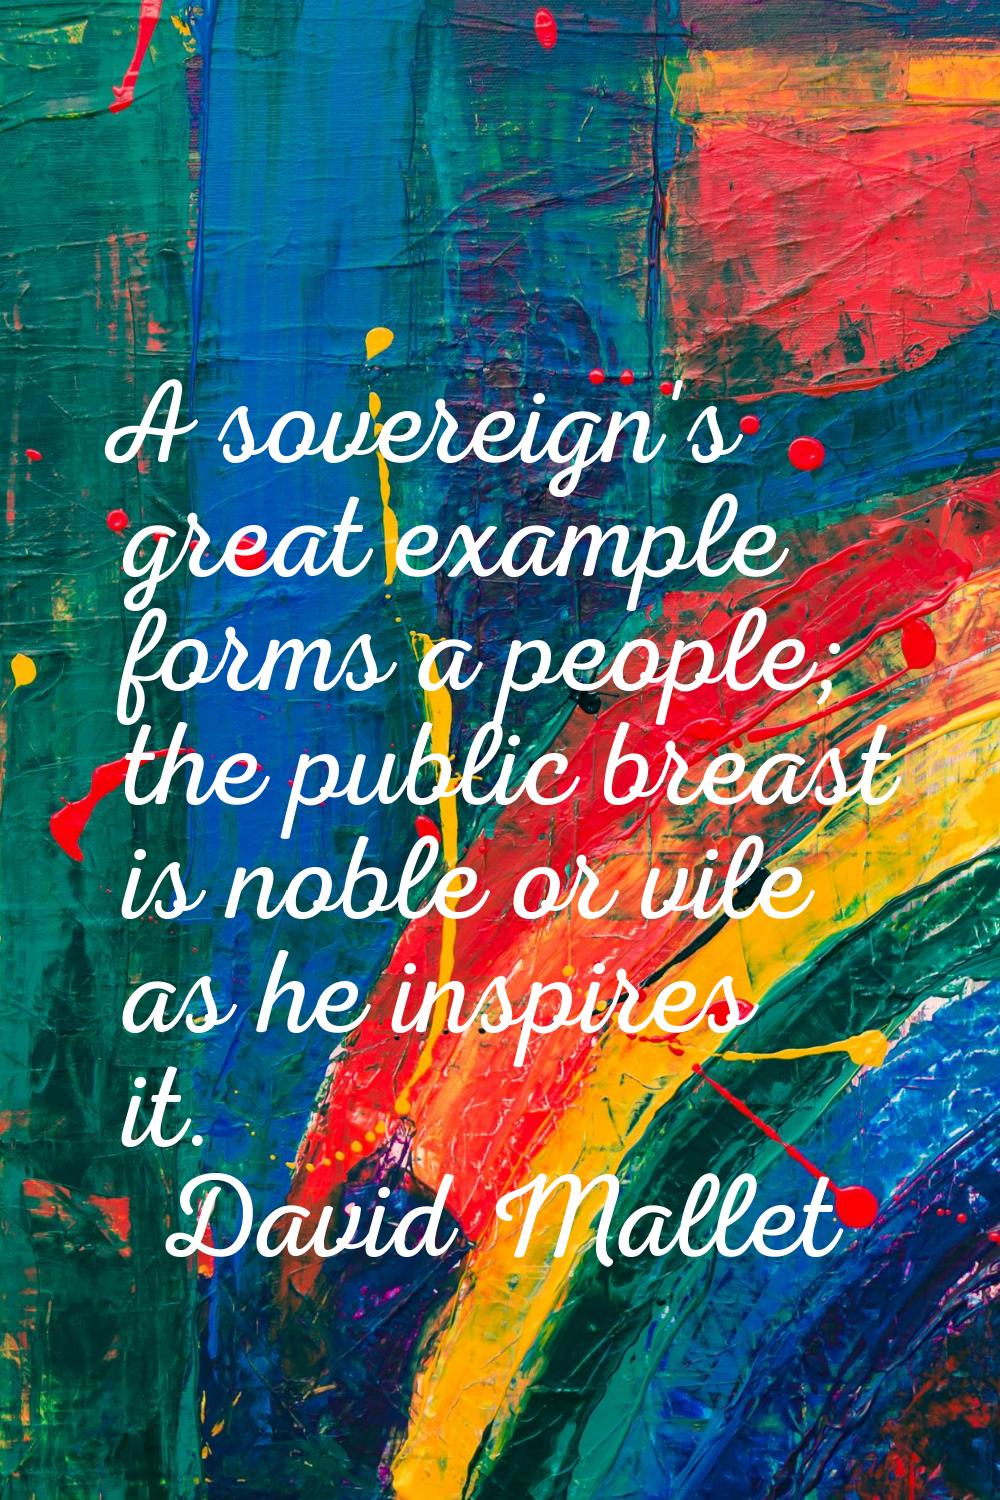 A sovereign's great example forms a people; the public breast is noble or vile as he inspires it.